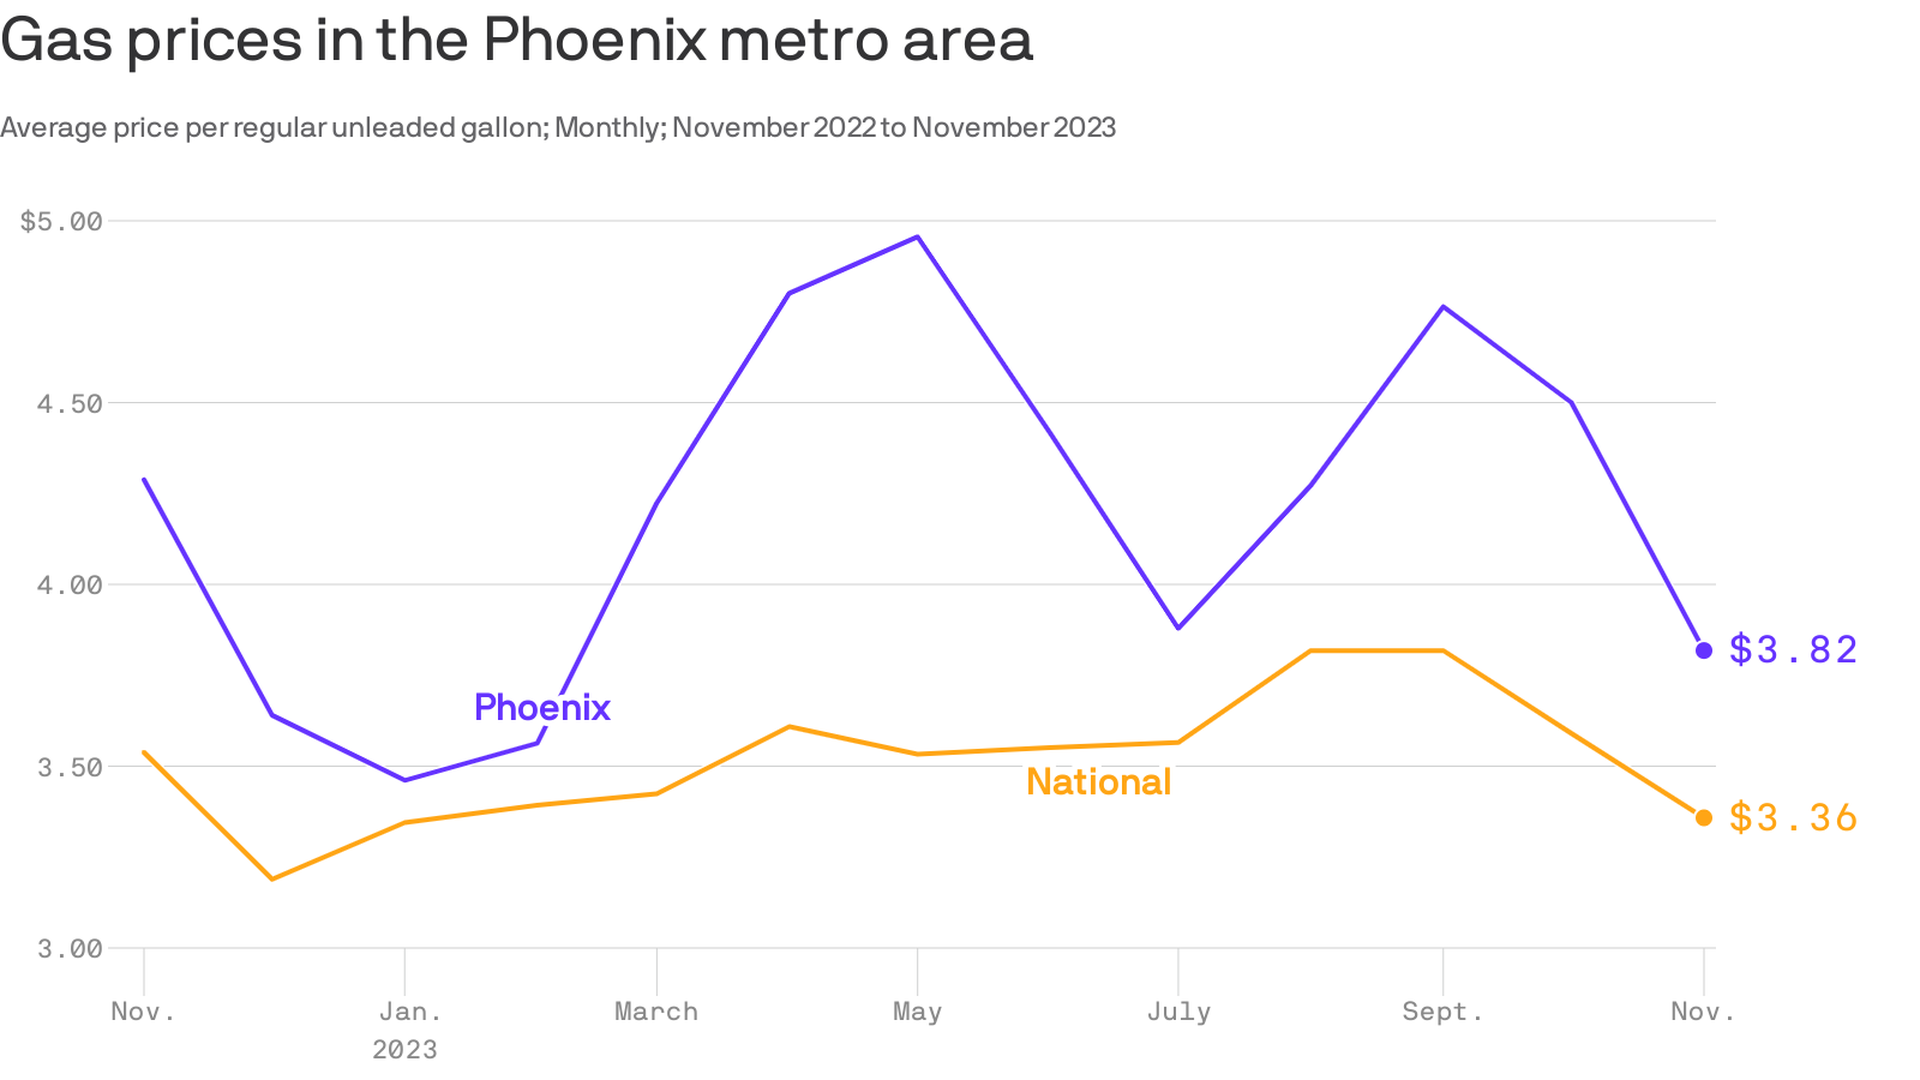 The line chart shows the monthly average price per gallon of regular unleaded gas in Phoenix compared to the national average from November 2022 to November 2023. The Phoenix prices remain above the national average at $3.82 per gallon, compared to $3.36 nationally.